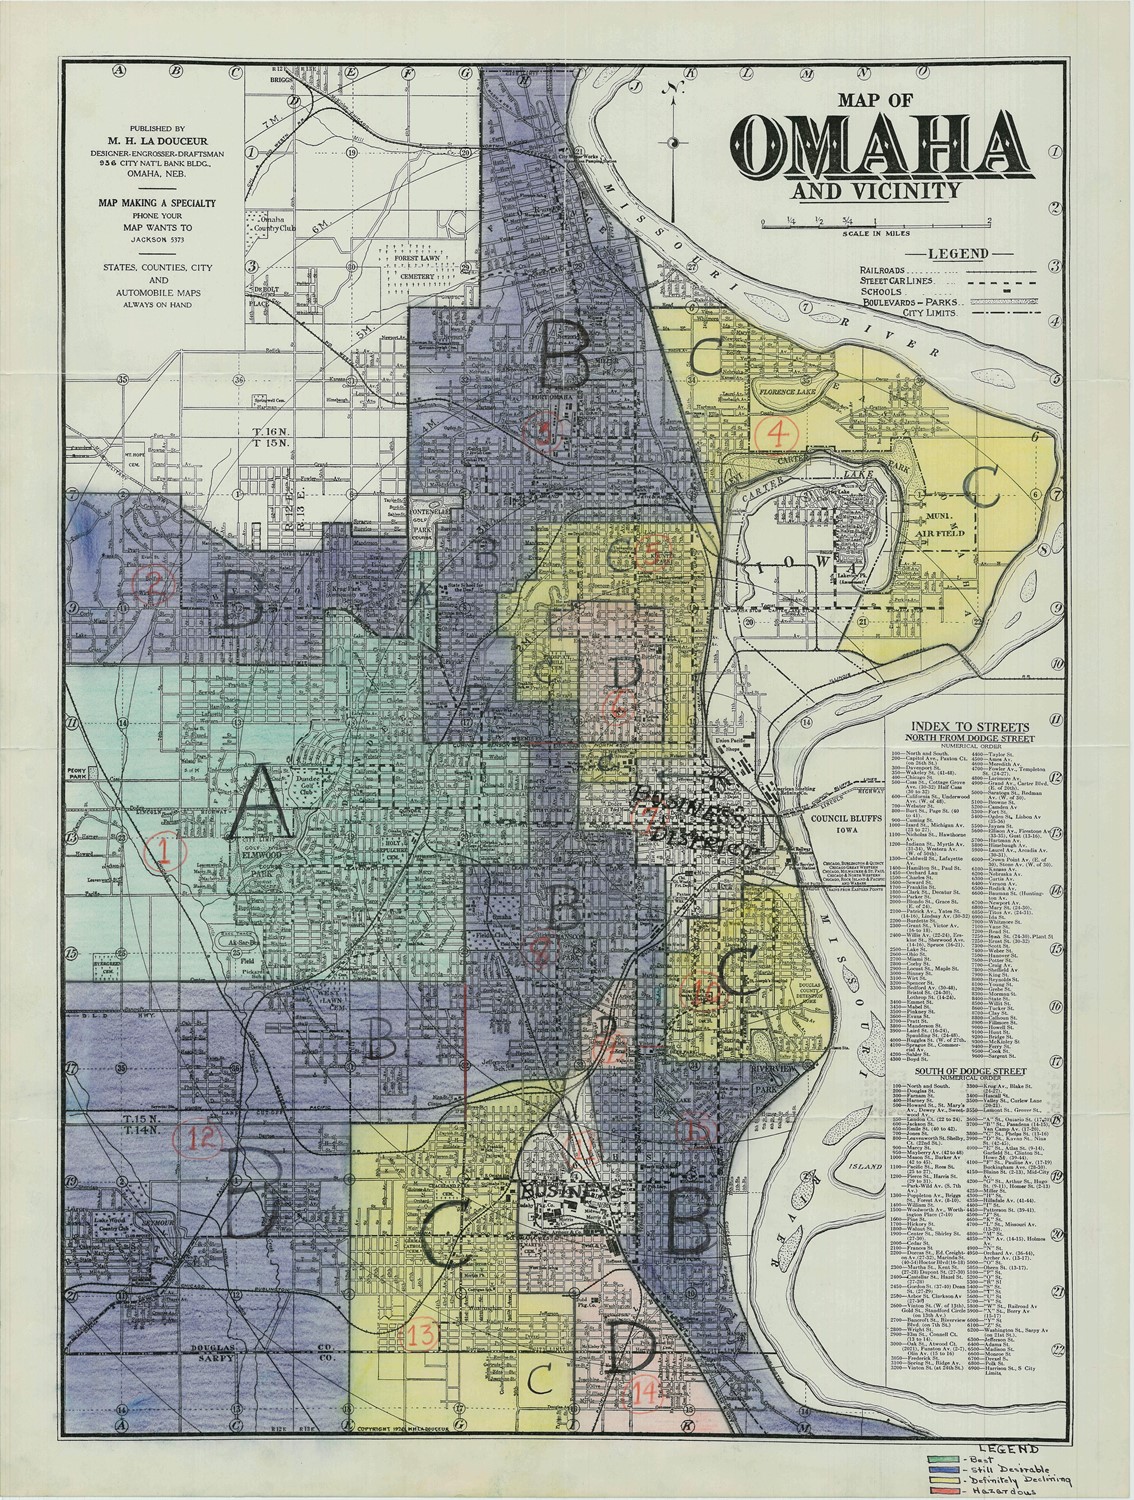 The 1935 Omaha Home Owner Loan Corporation map designated neighborhoods in North and South Omaha as yellow and red, while neighborhoods in West Omaha are designated gree